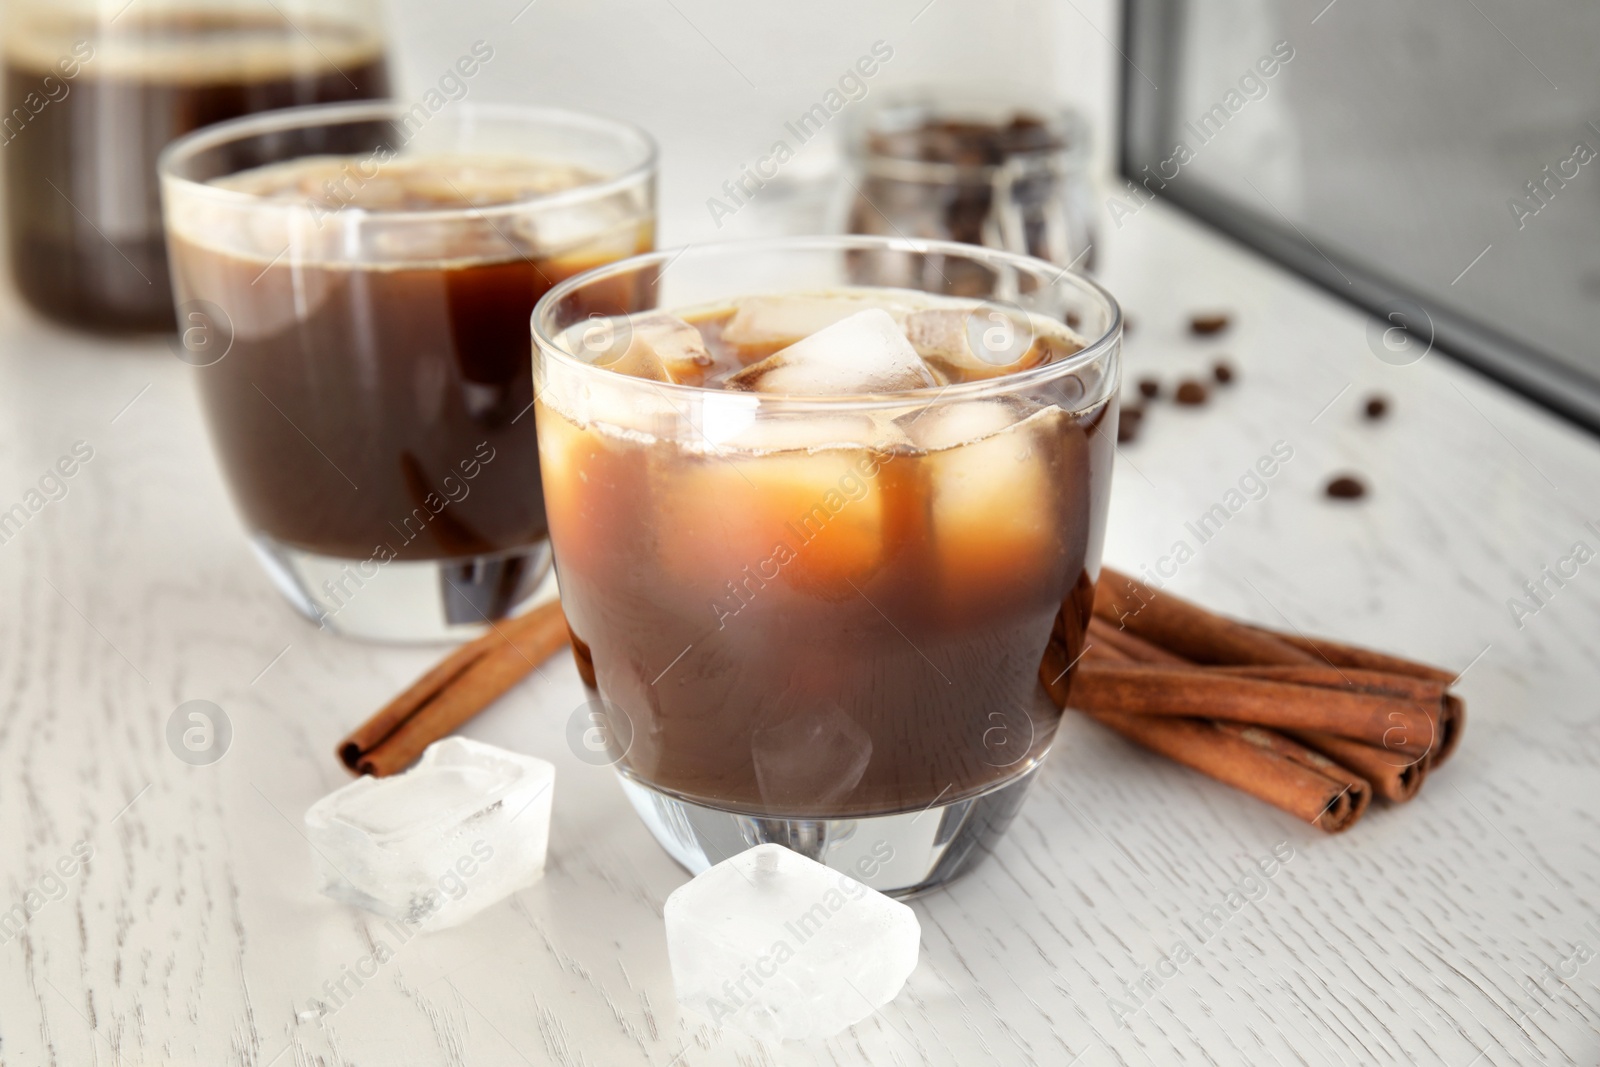 Photo of Glasses of coffee drink with ice cubes on table